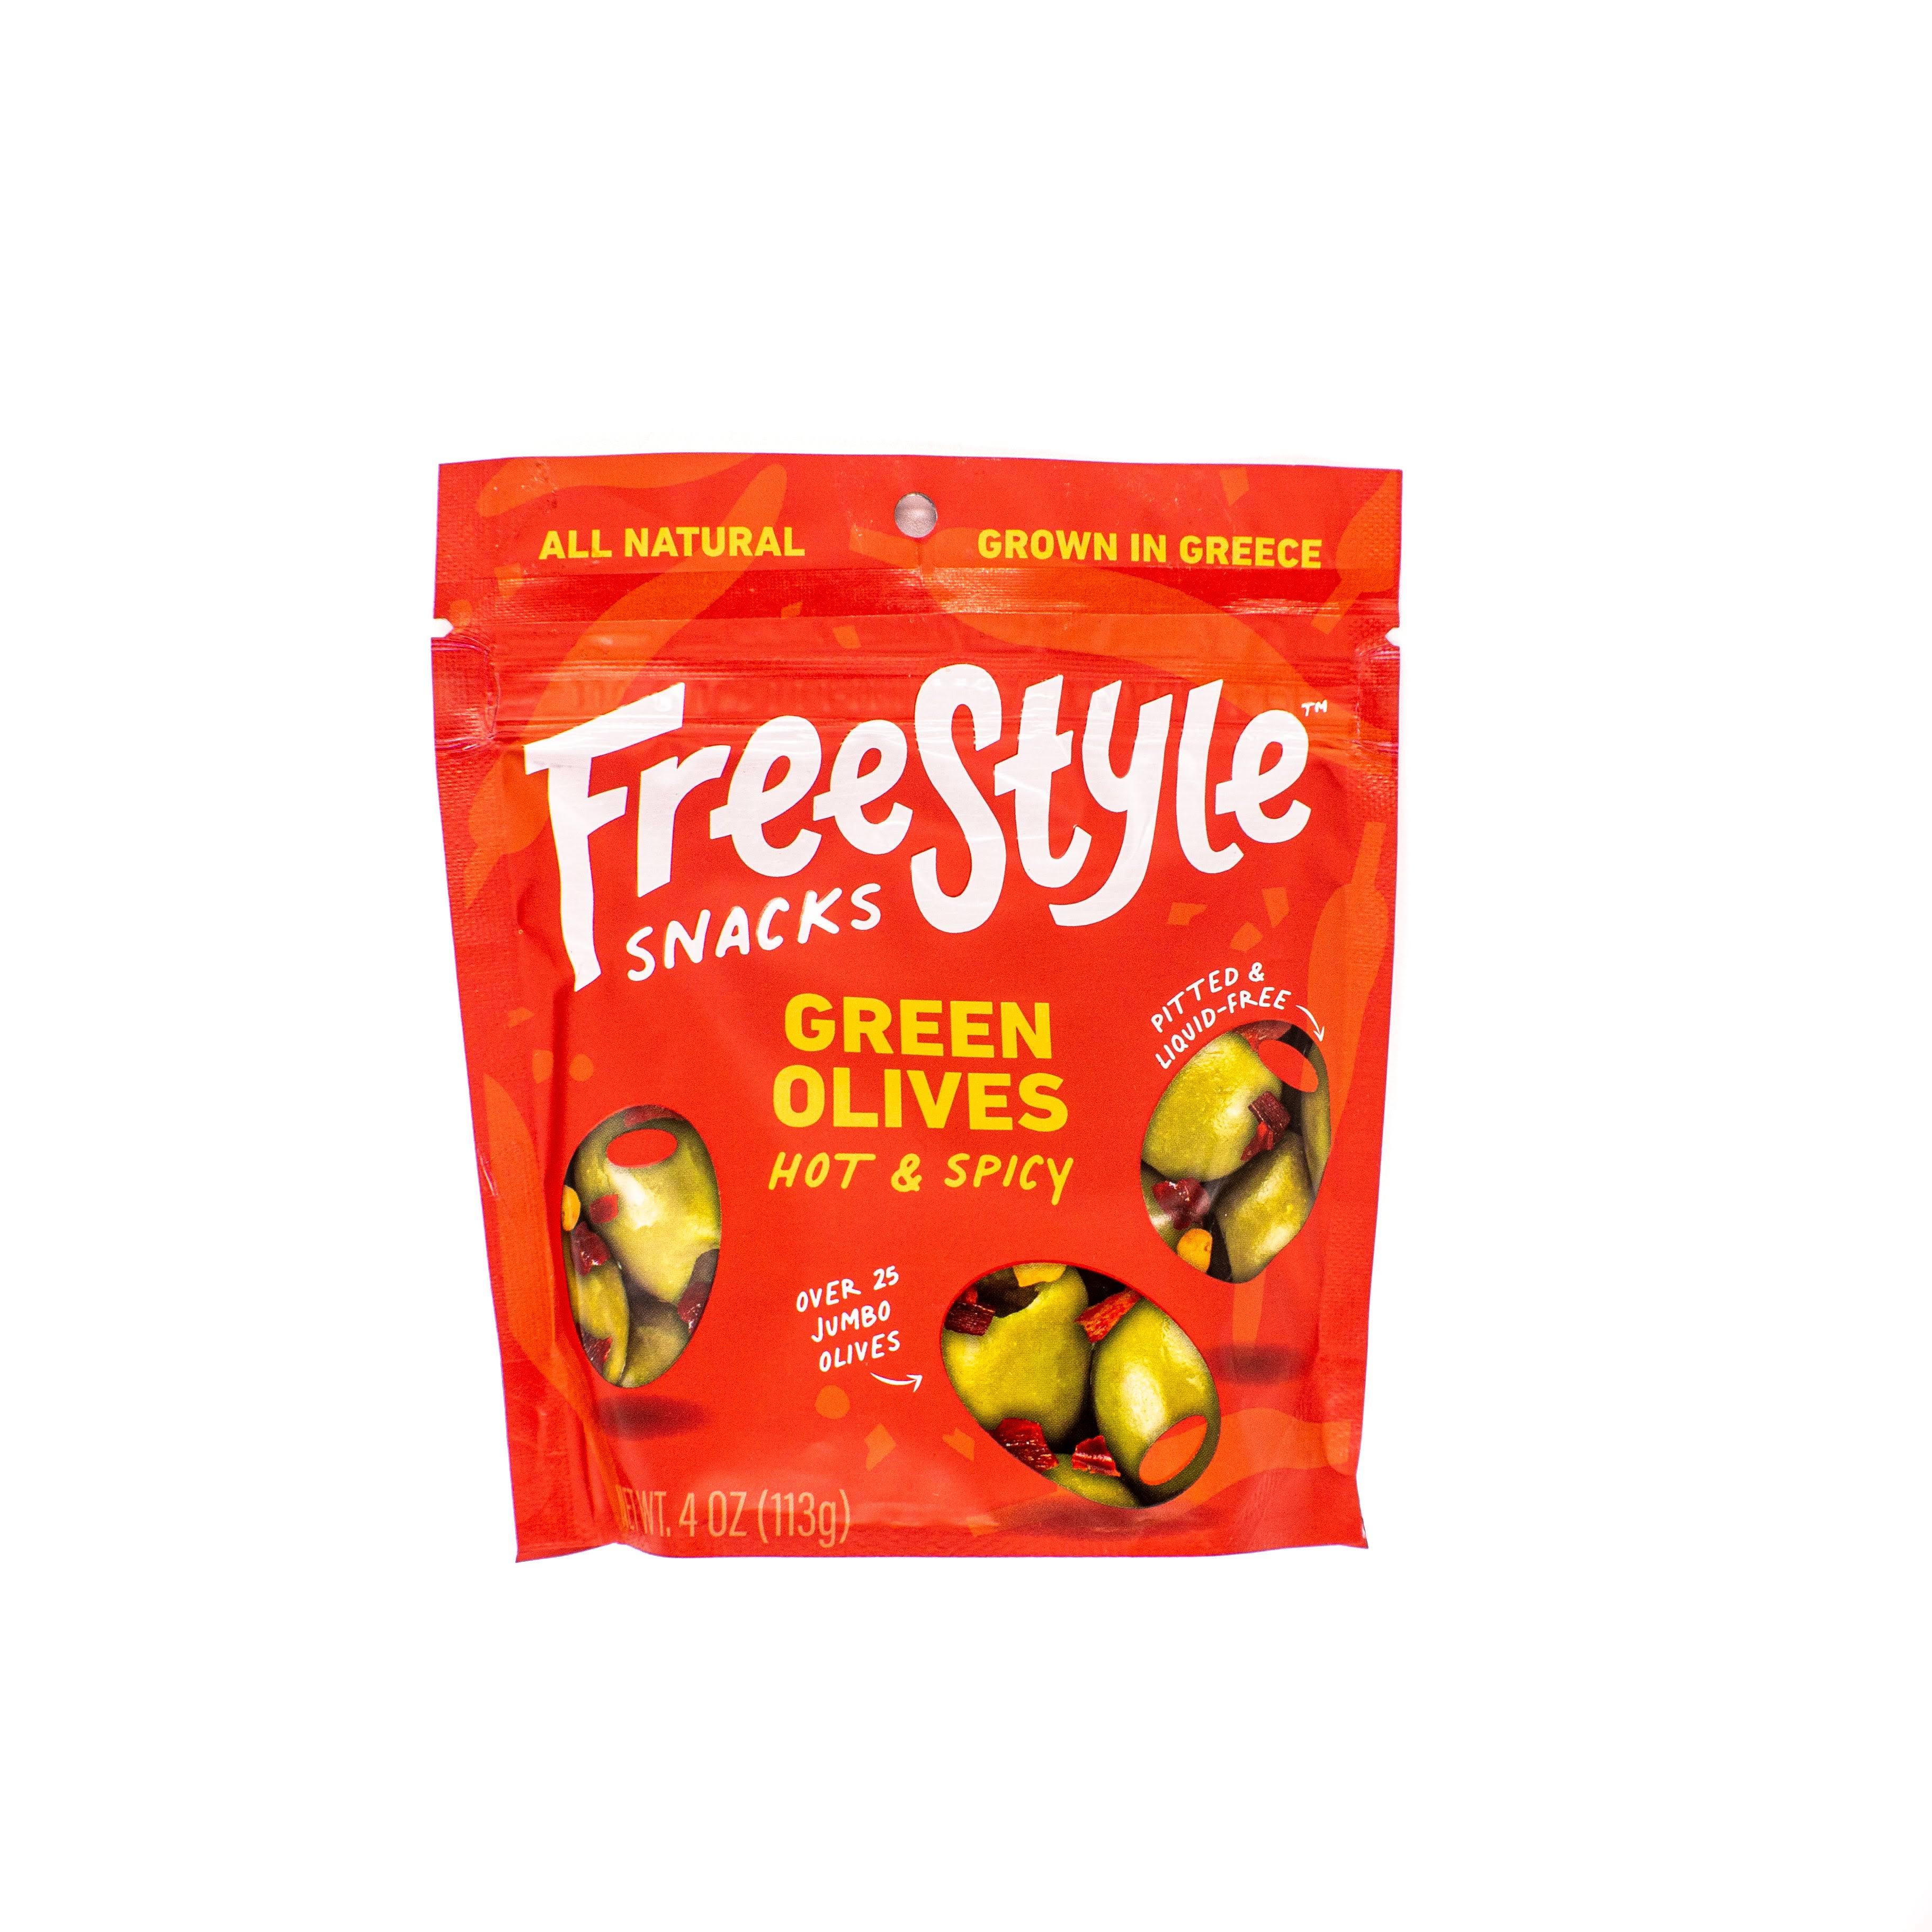 Freestyle Snacks Green Olives Hot & Spicy - 4.0 oz